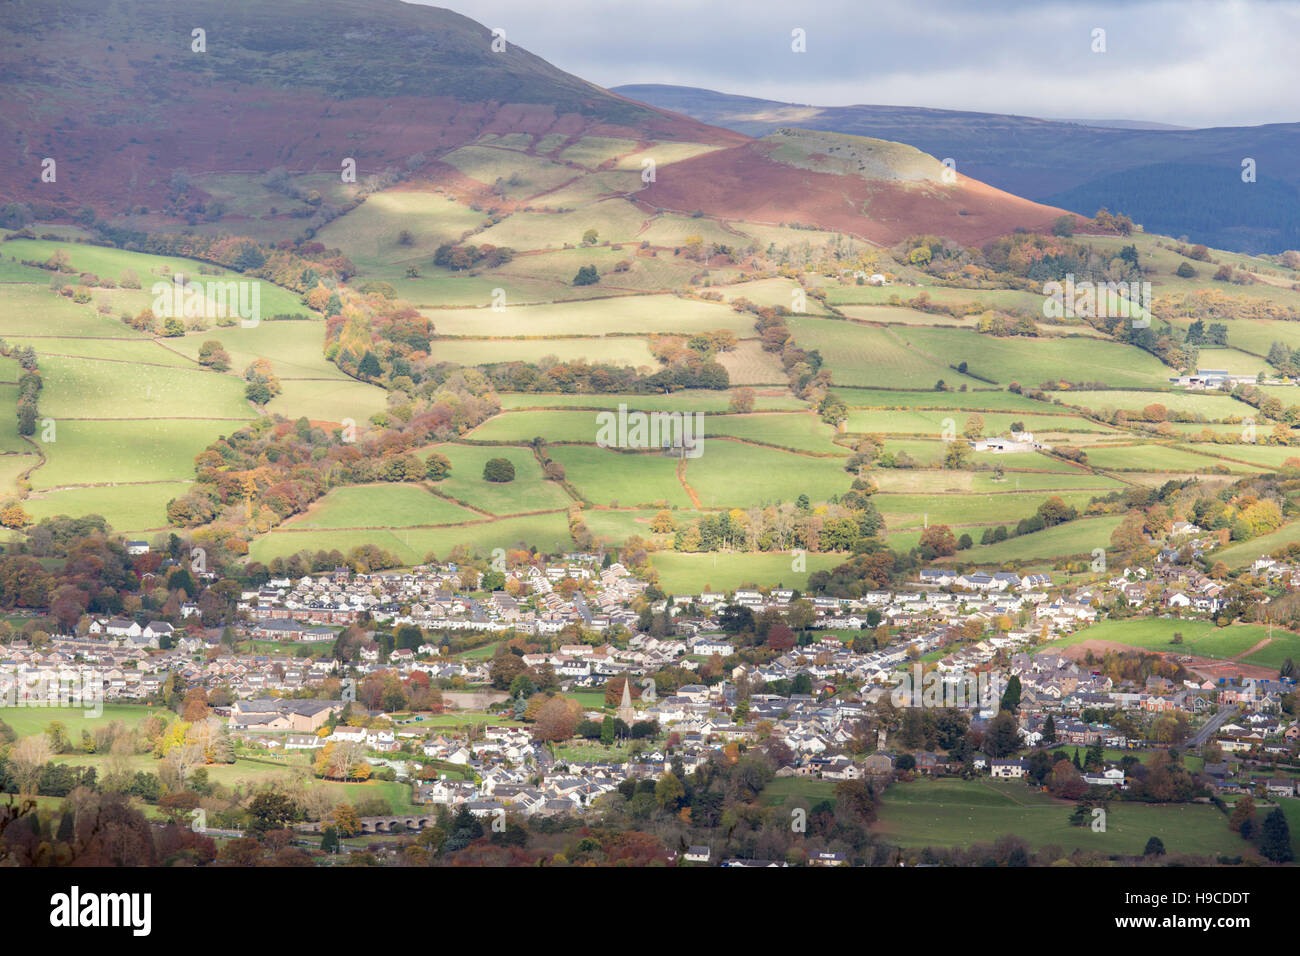 The rural town of Crickhowell, Brecon Beacons National Park, Powys, Mid Wales, UK Stock Photo